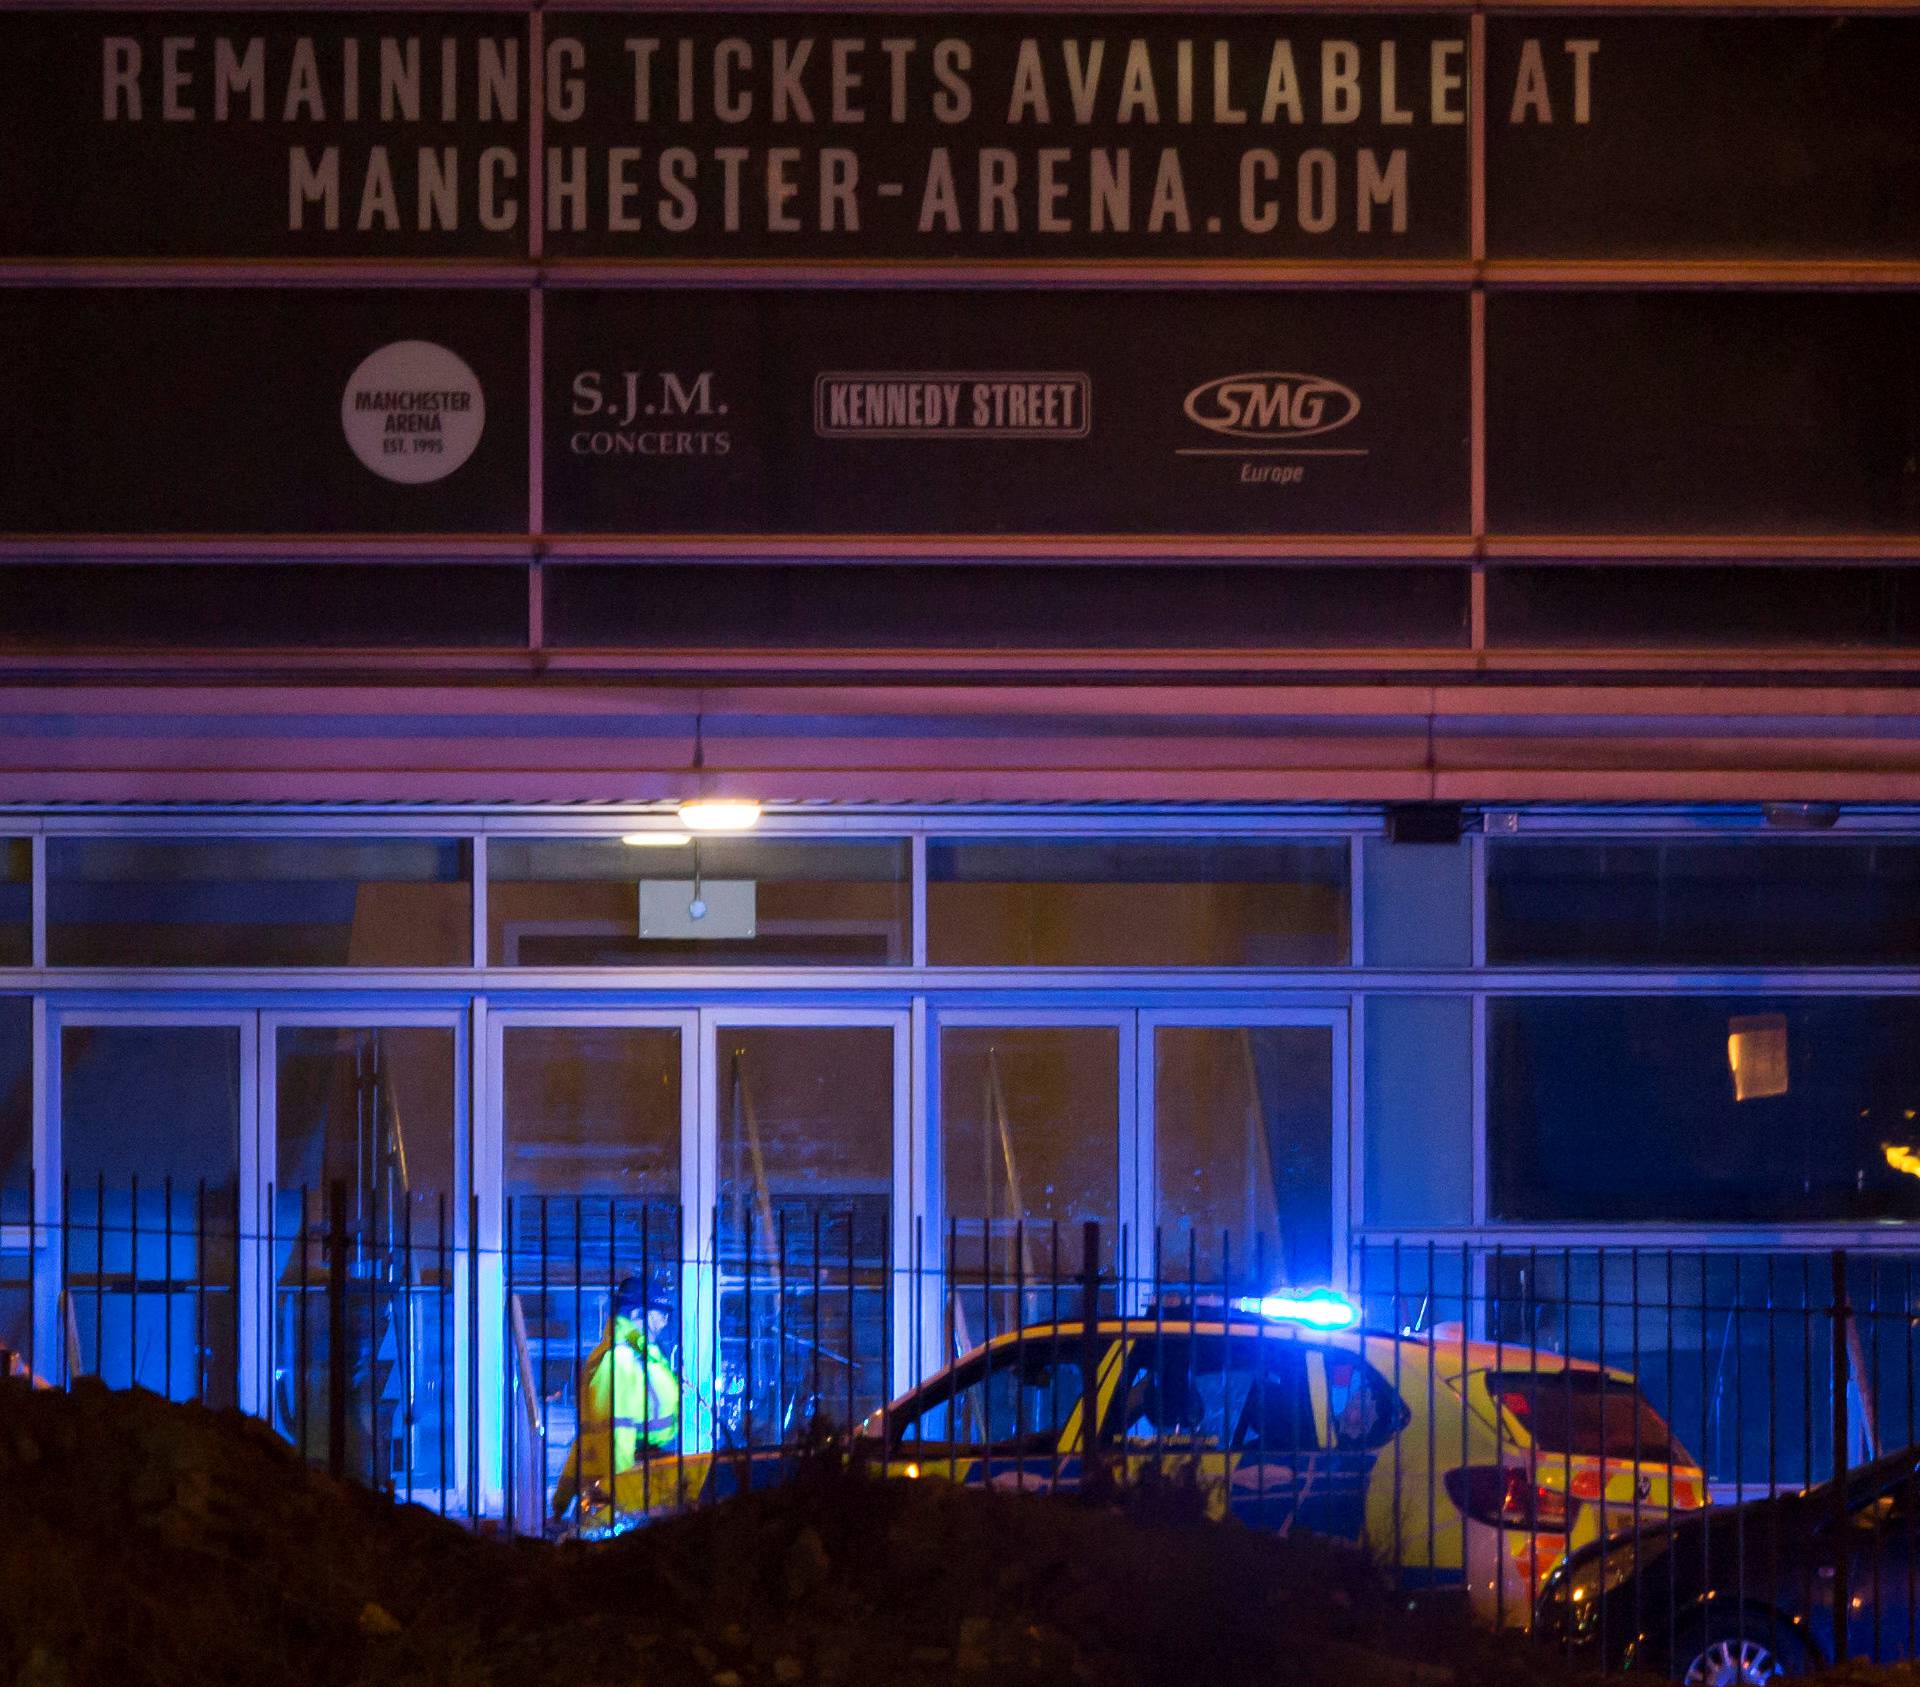 Police are seen outside the Manchester Arena in northern England where U.S. singer Ariana Grande had been performing